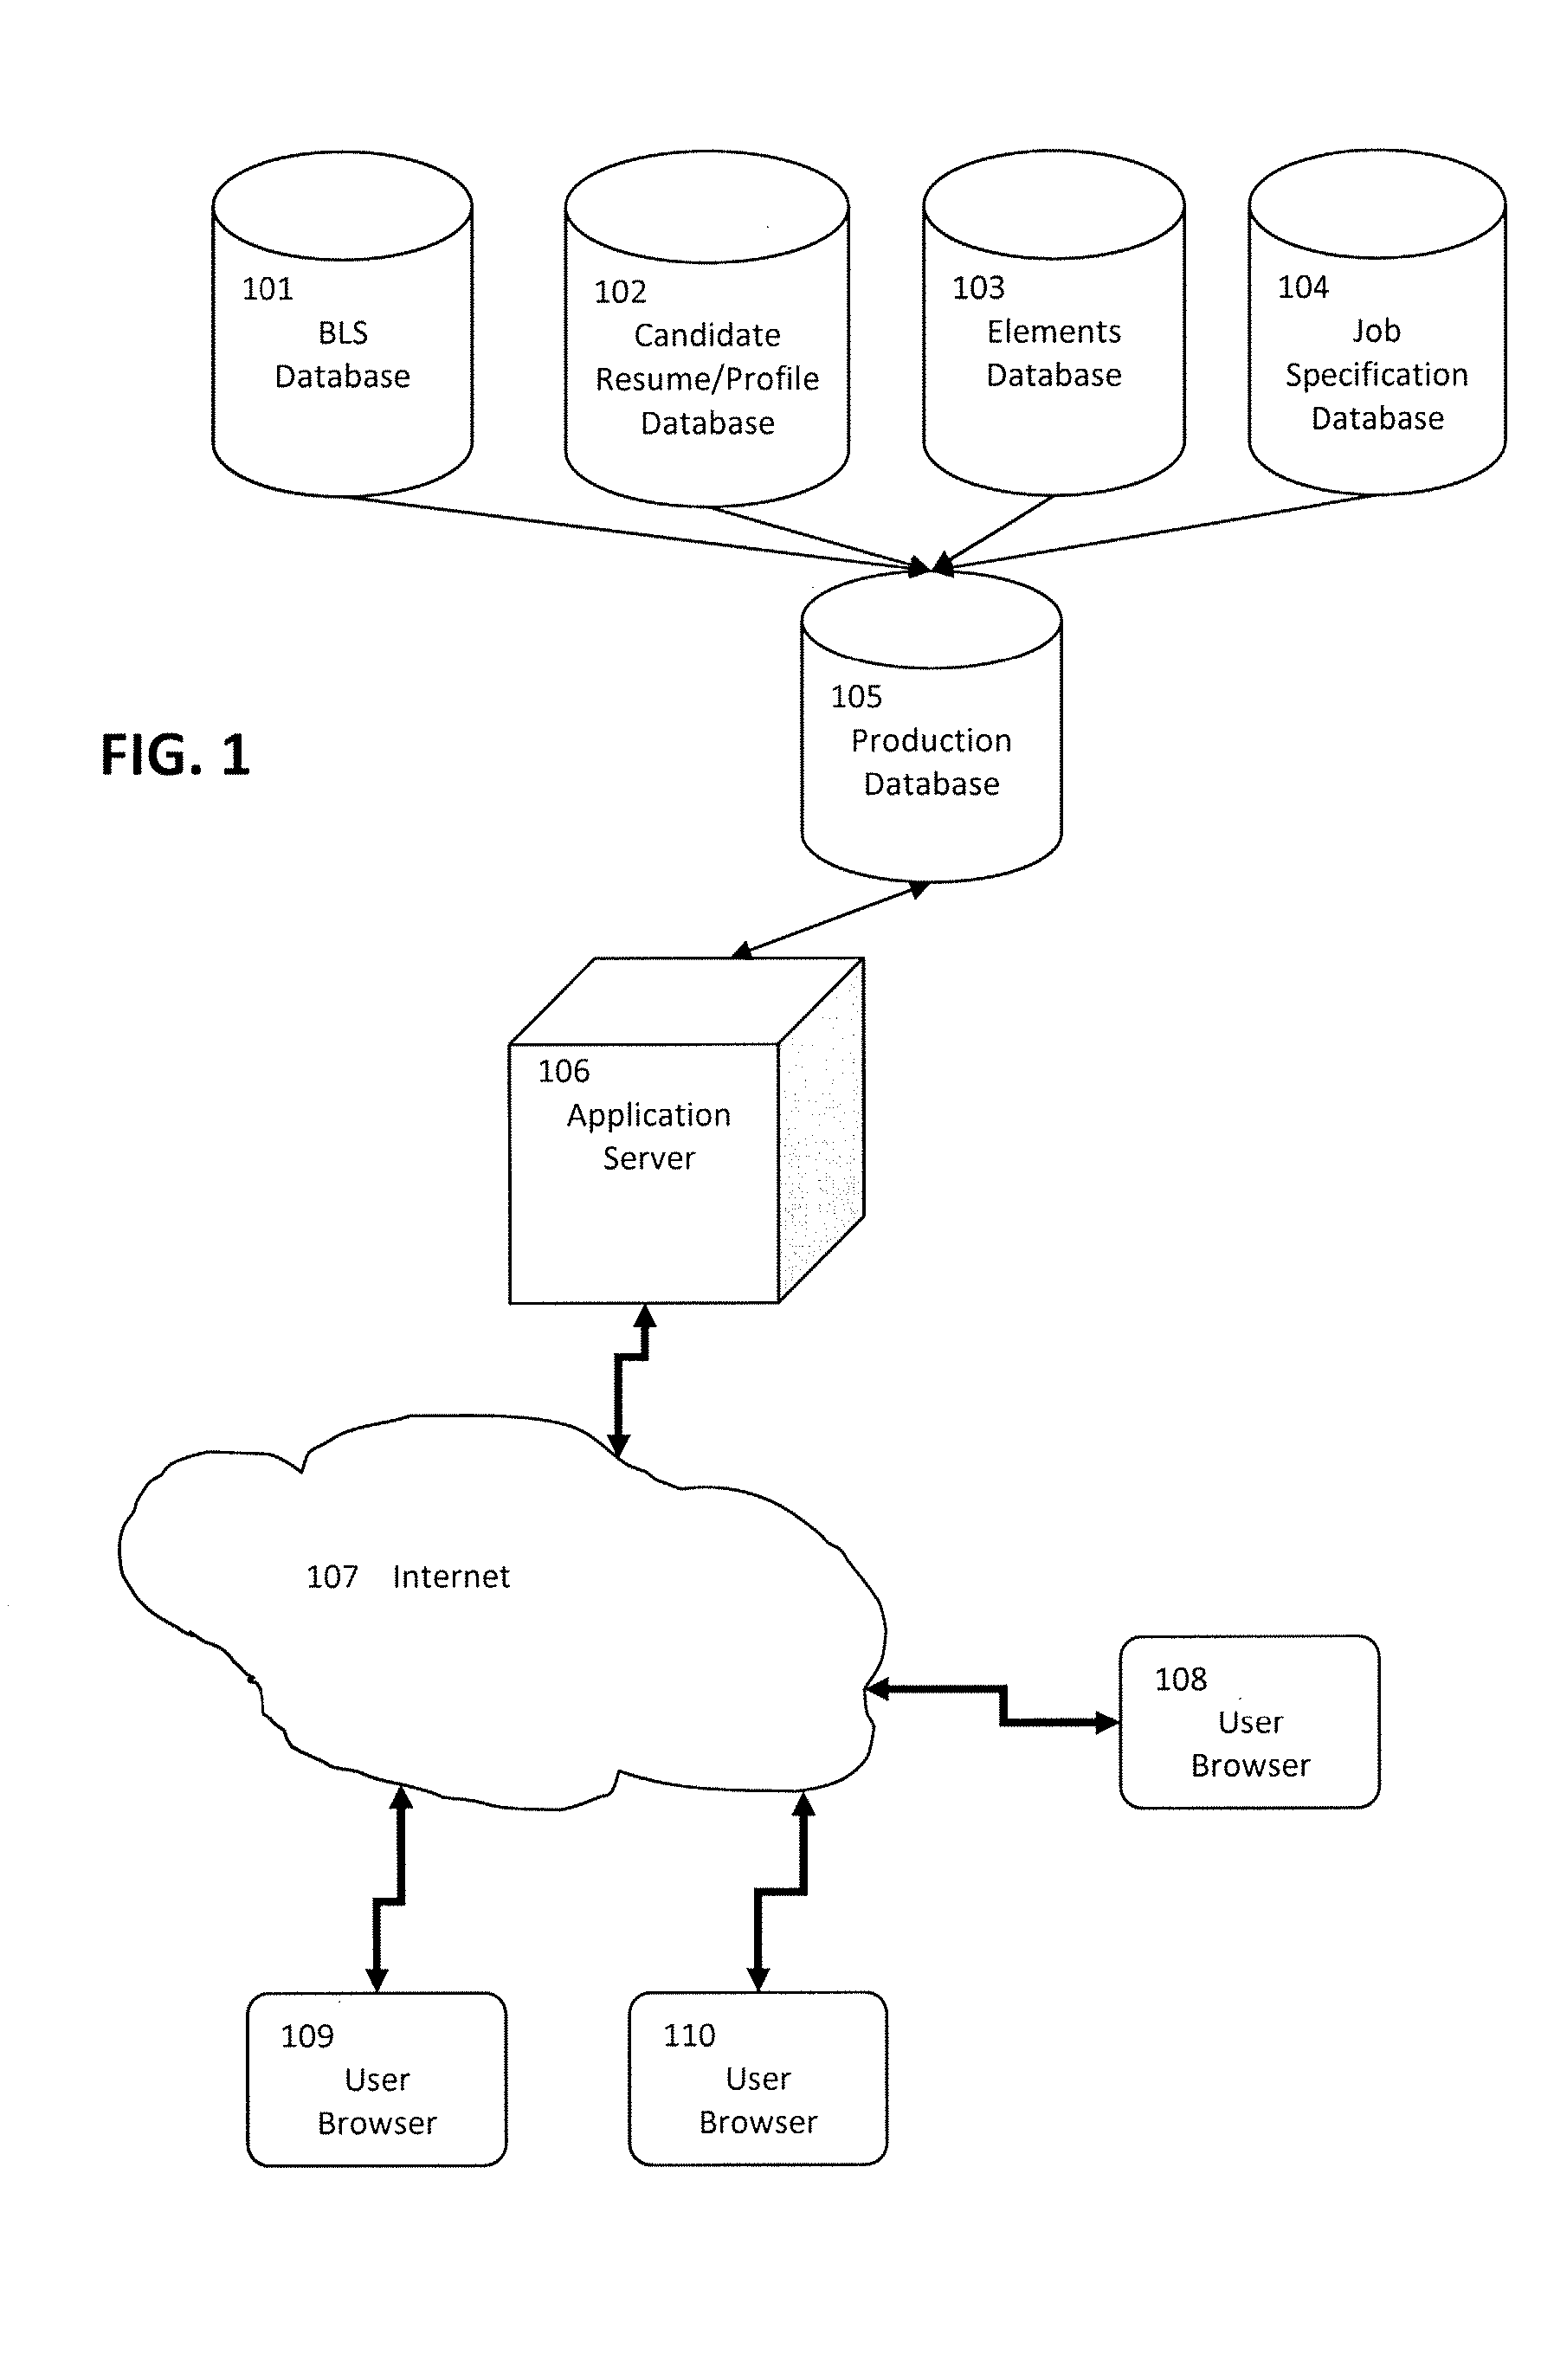 System and method for automatically processing candidate resumes and job specifications expressed in natural language into a common, normalized, validated form